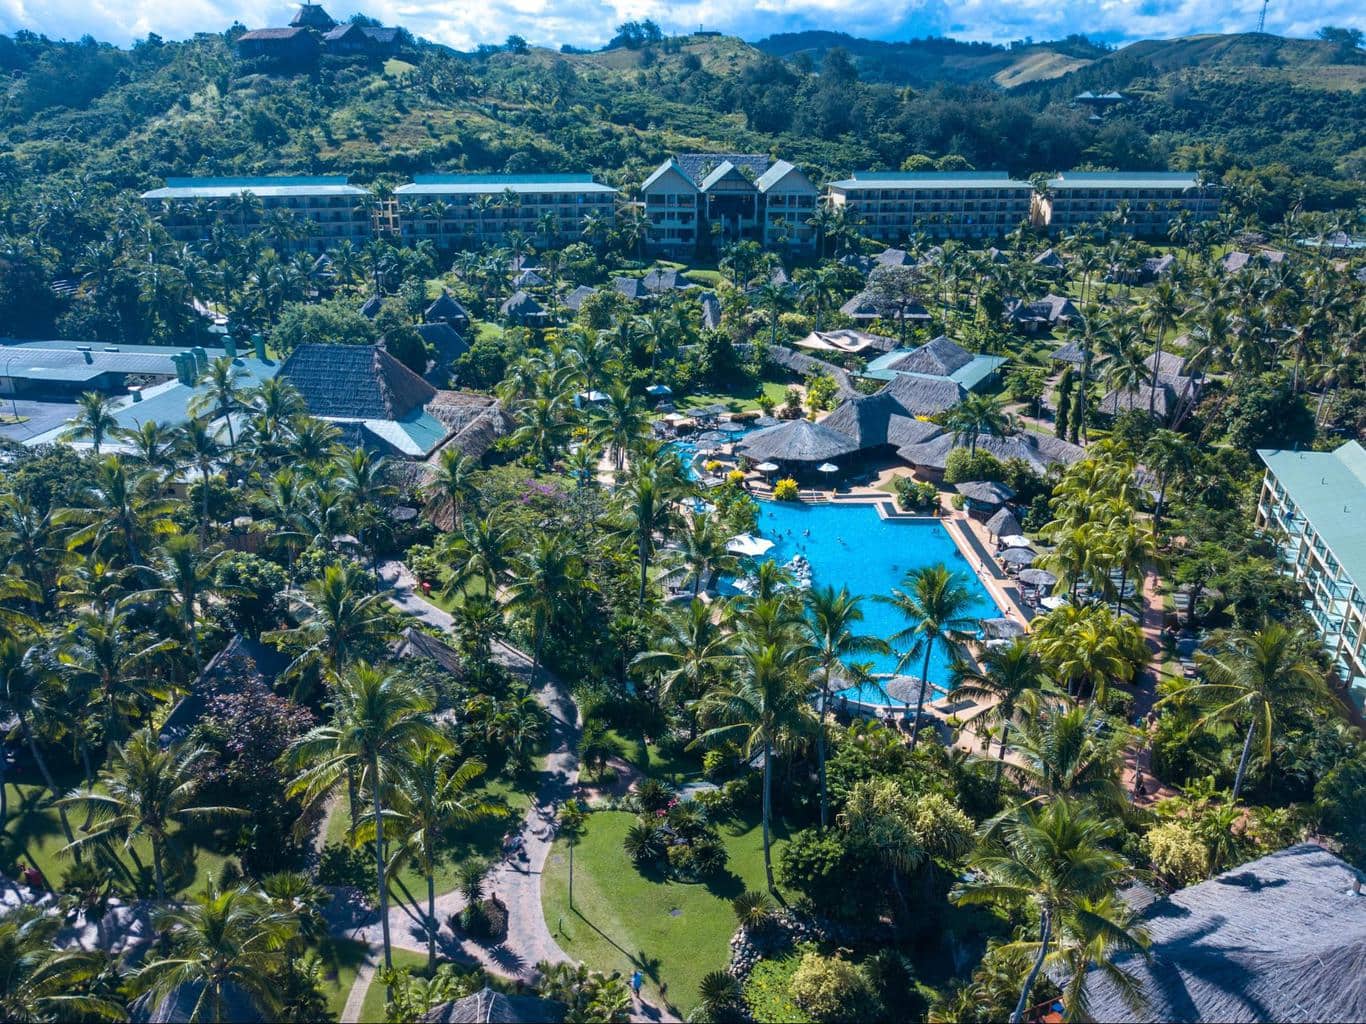 The main building and pool at Outrigger Fiji Beach Resort